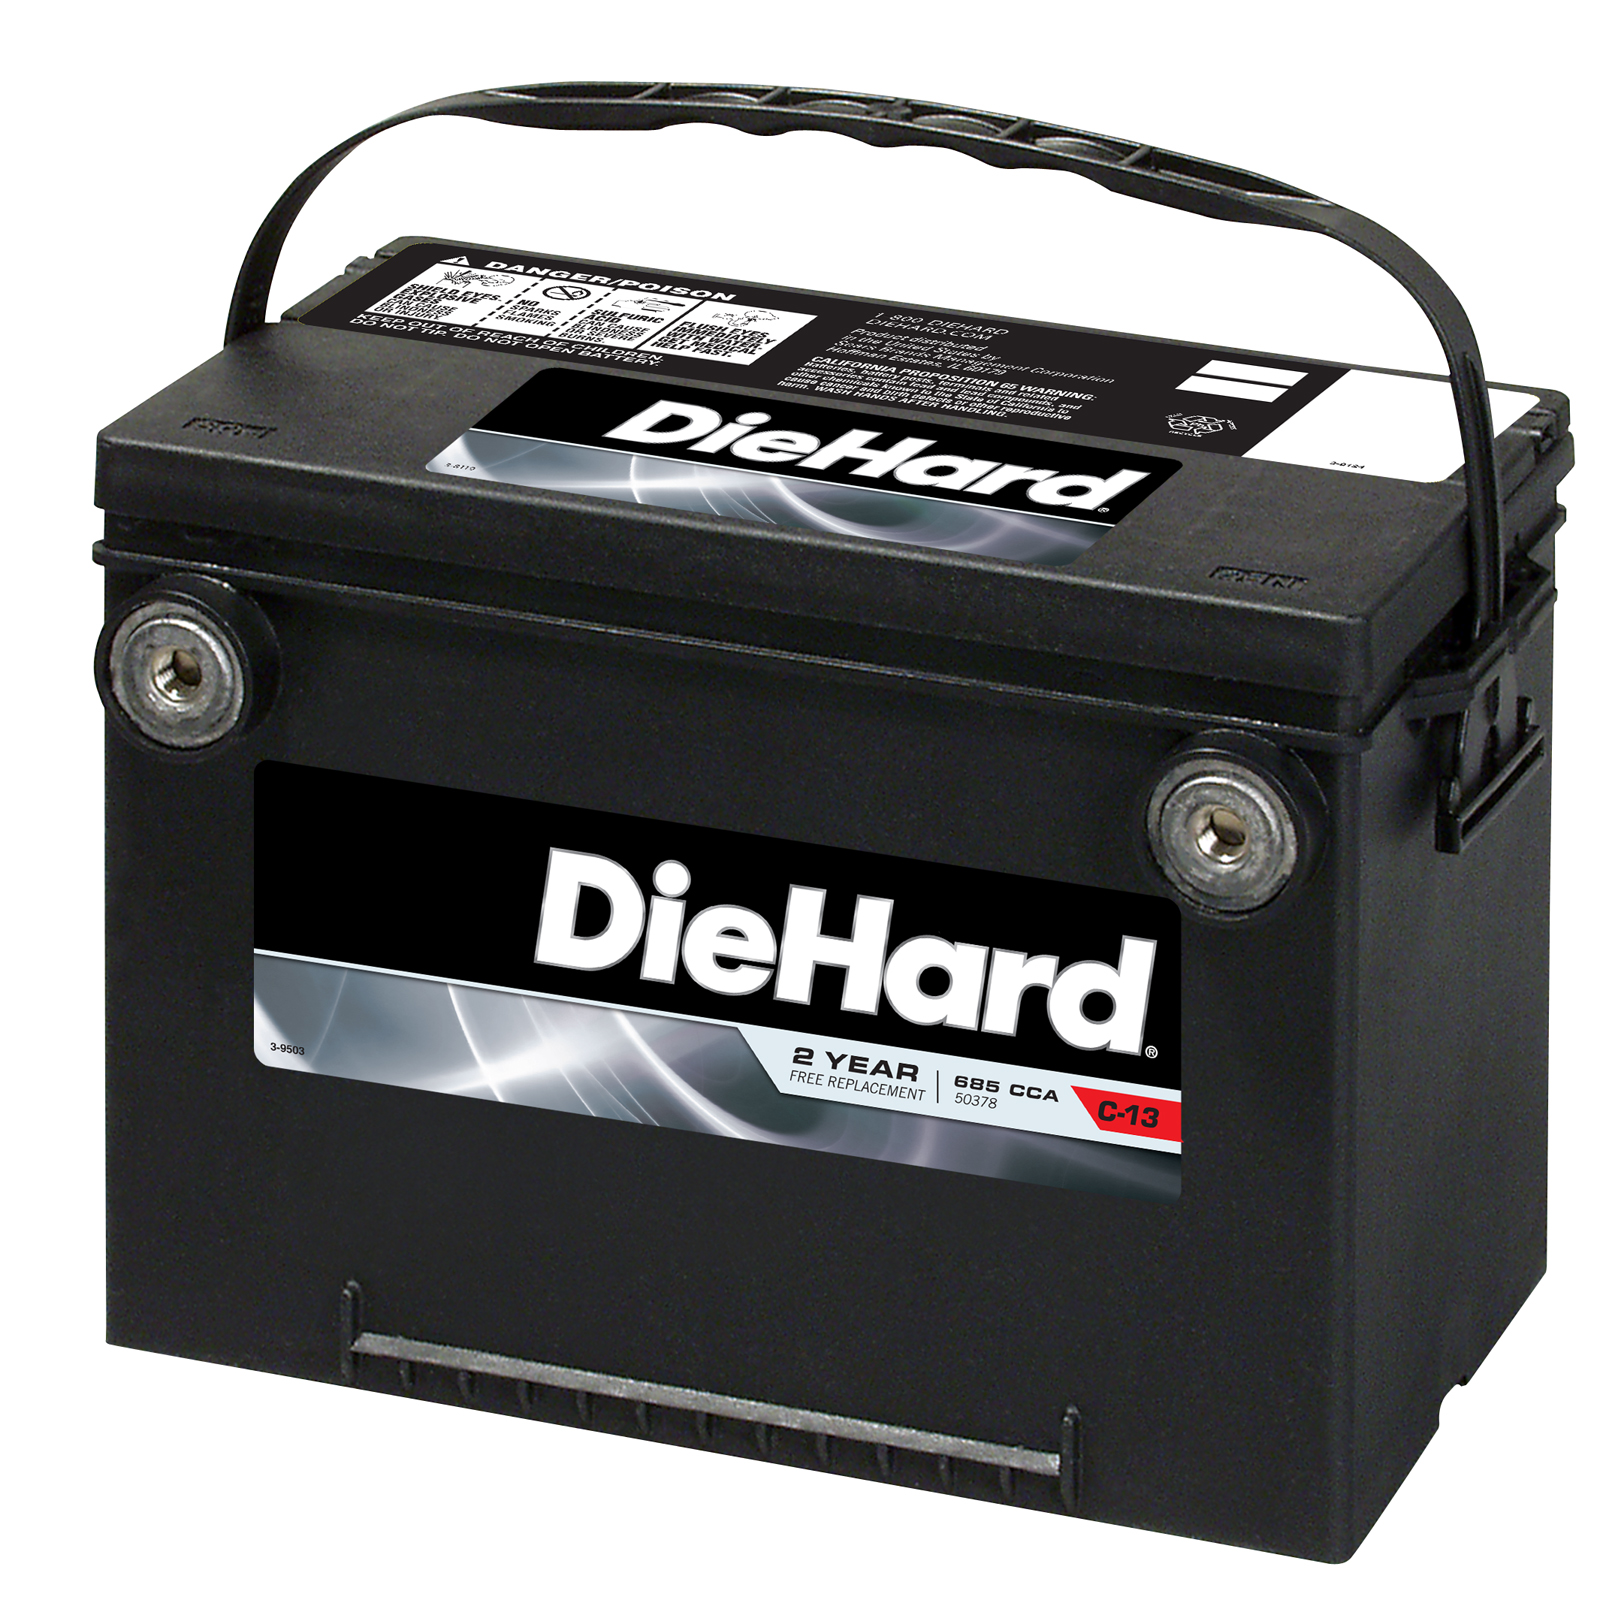 DieHard Automotive Battery - Group Size EP-78 (Price with Exchange)